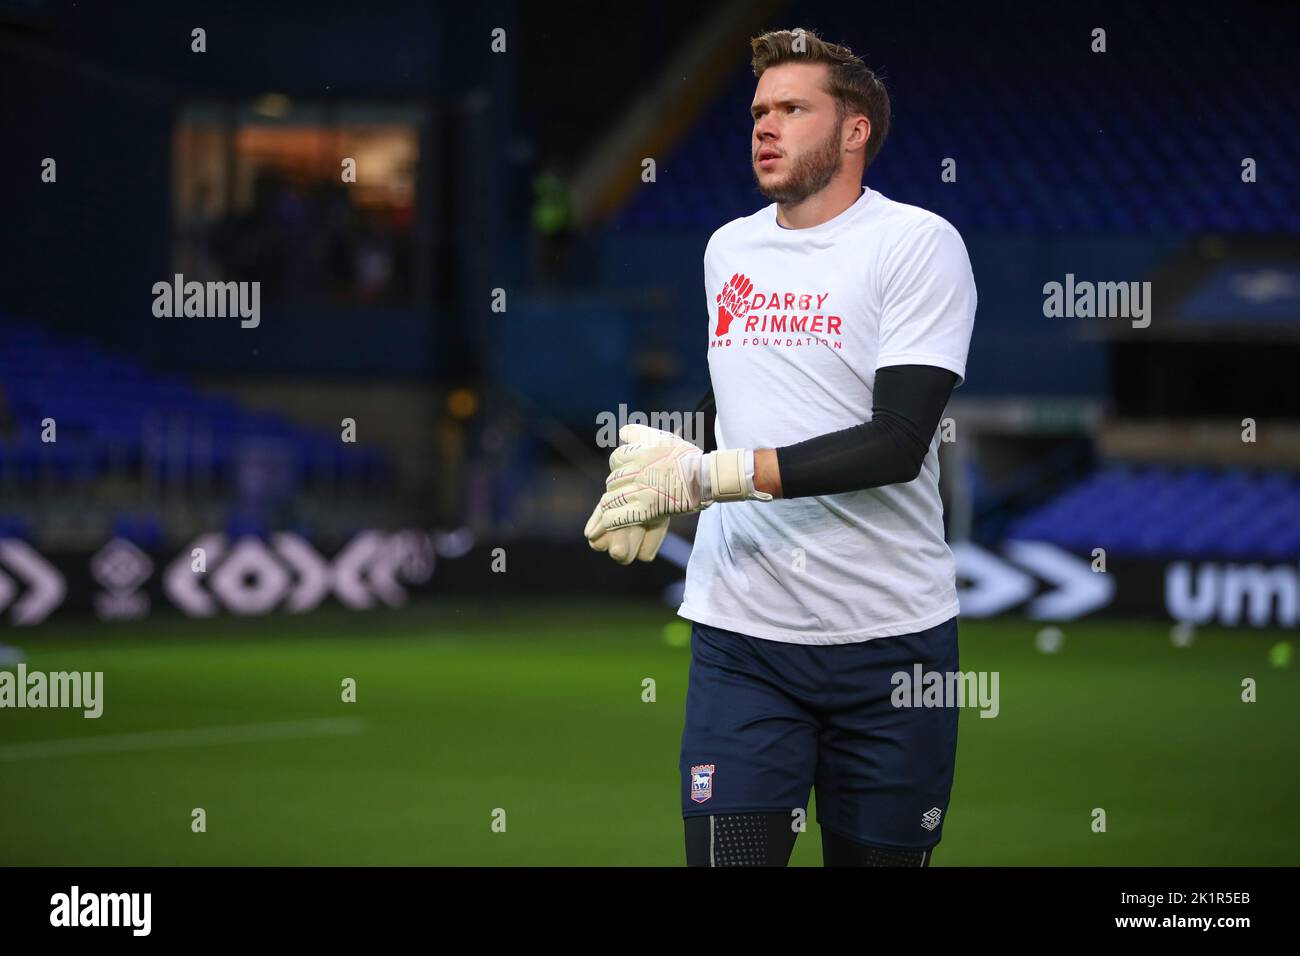 Nick Hayes of Ipswich Town warms up wearing t-shirt in support of former player Marcus Stewart who recently diagnosed with Motor Neurone Disease (MND)- Ipswich Town v Bristol Rovers, Sky Bet League One, Portman Road, Ipswich, UK - 13th September 2022  Editorial Use Only - DataCo restrictions apply Stock Photo